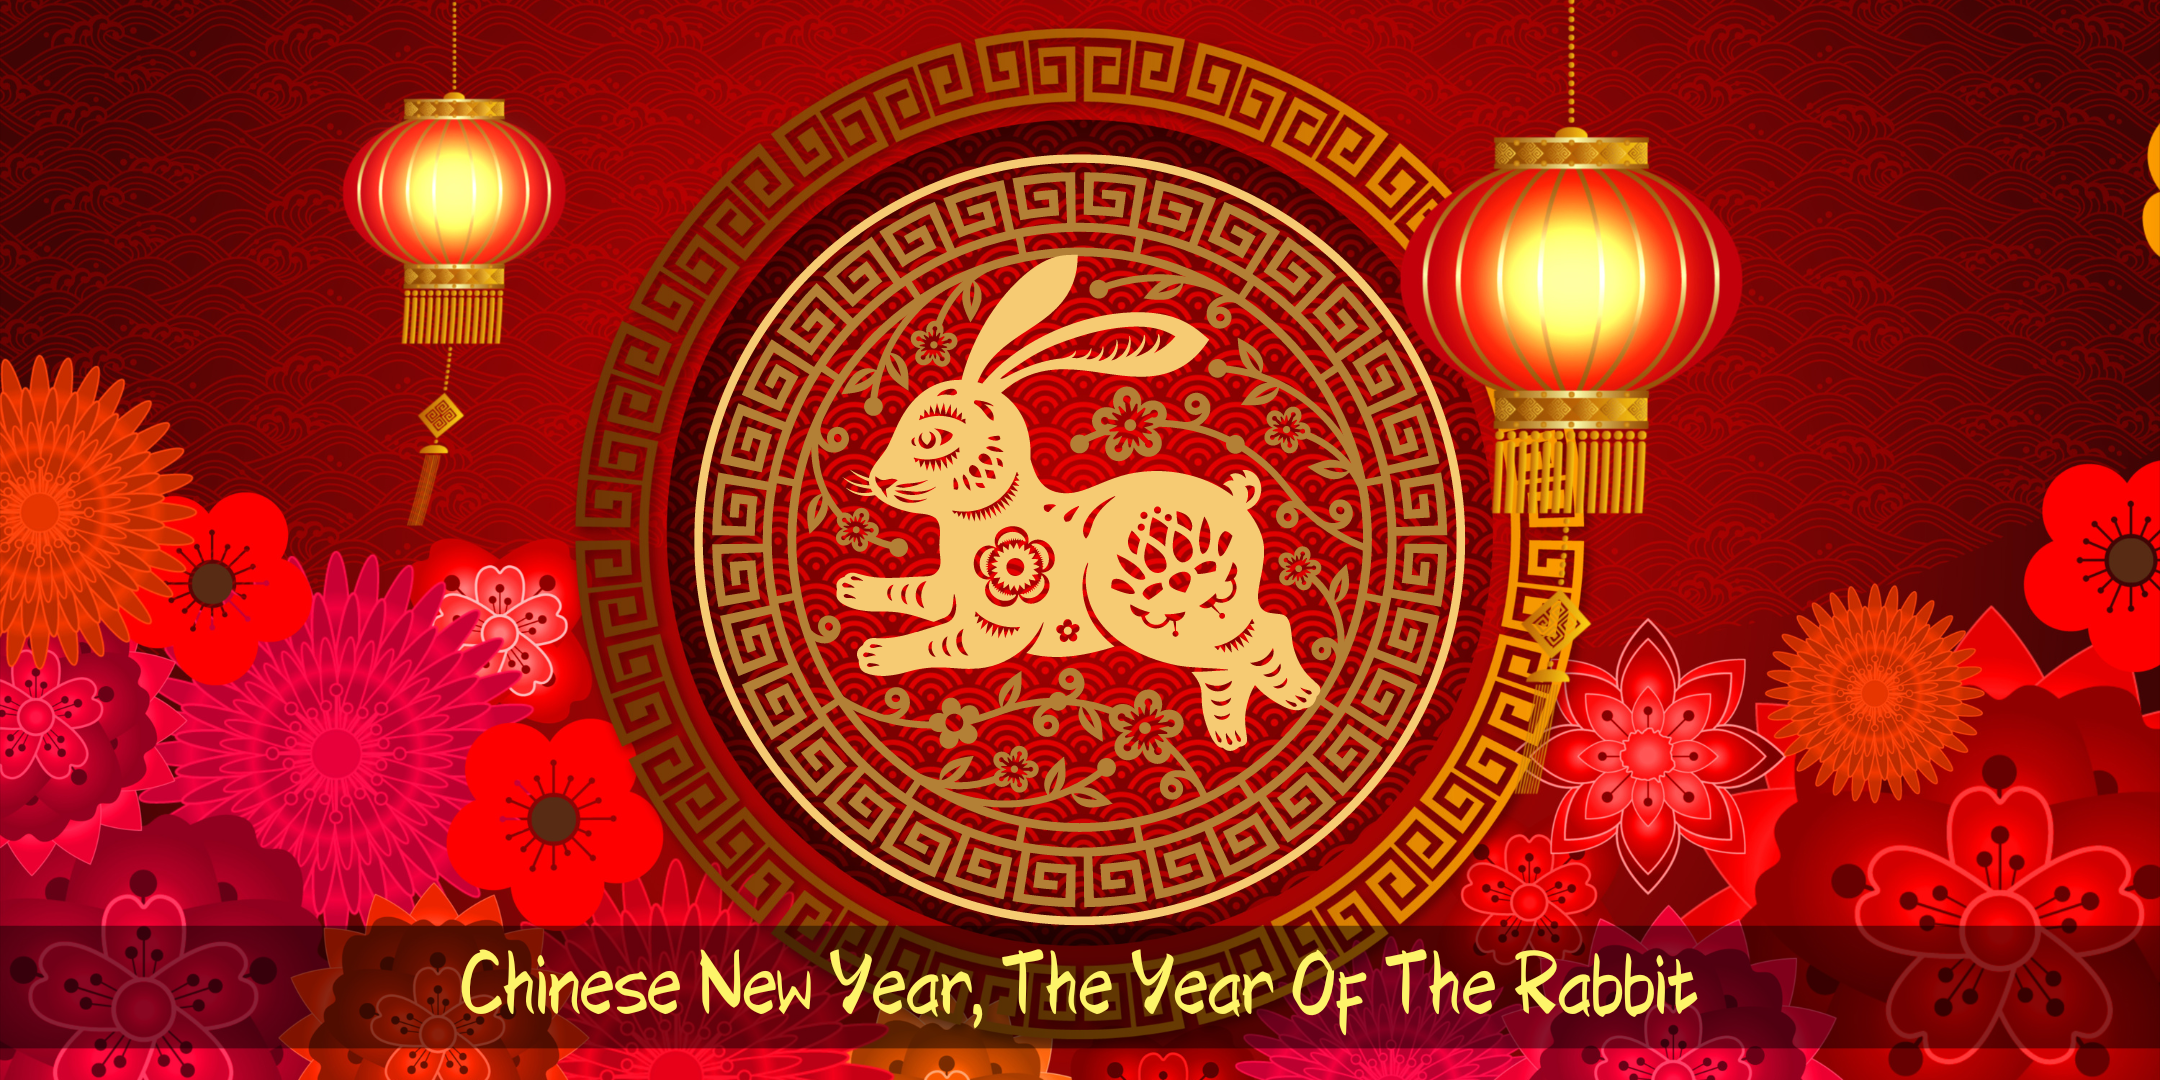 Gong Hey Fat Choy It’s the Year of the Rabbit Chinese New Year Specials Starting January 24, 2023